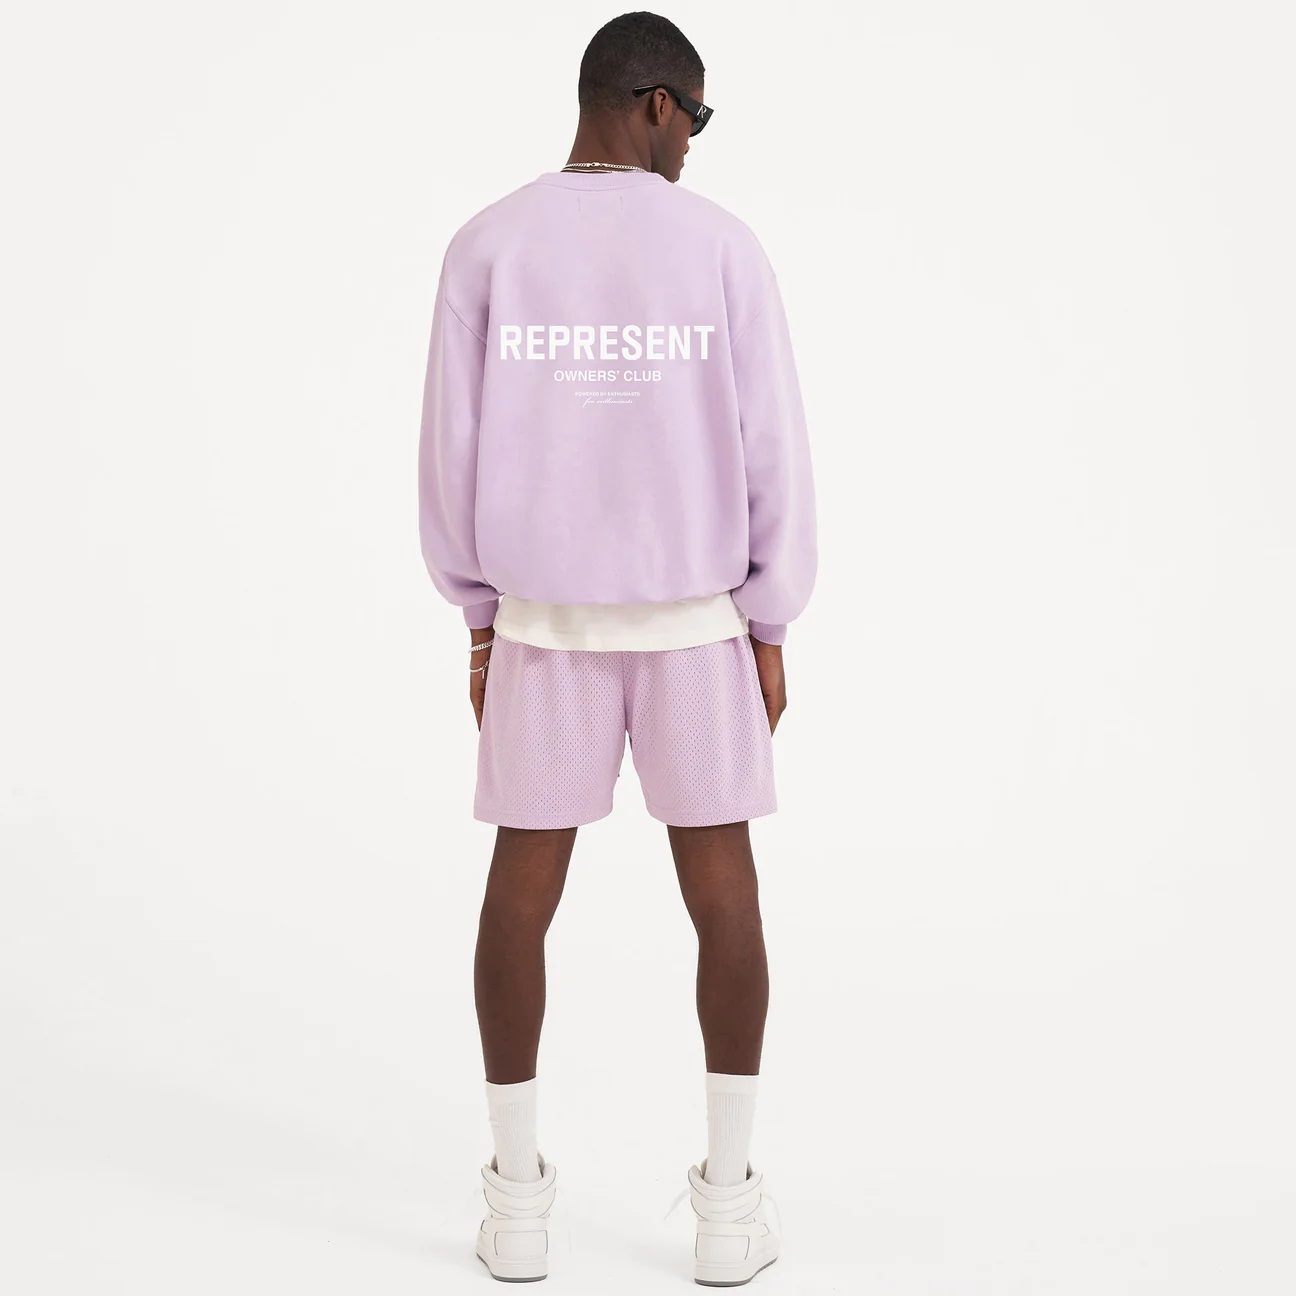 REPRESENT Owners Club Sweater in Pastel Lilac XL